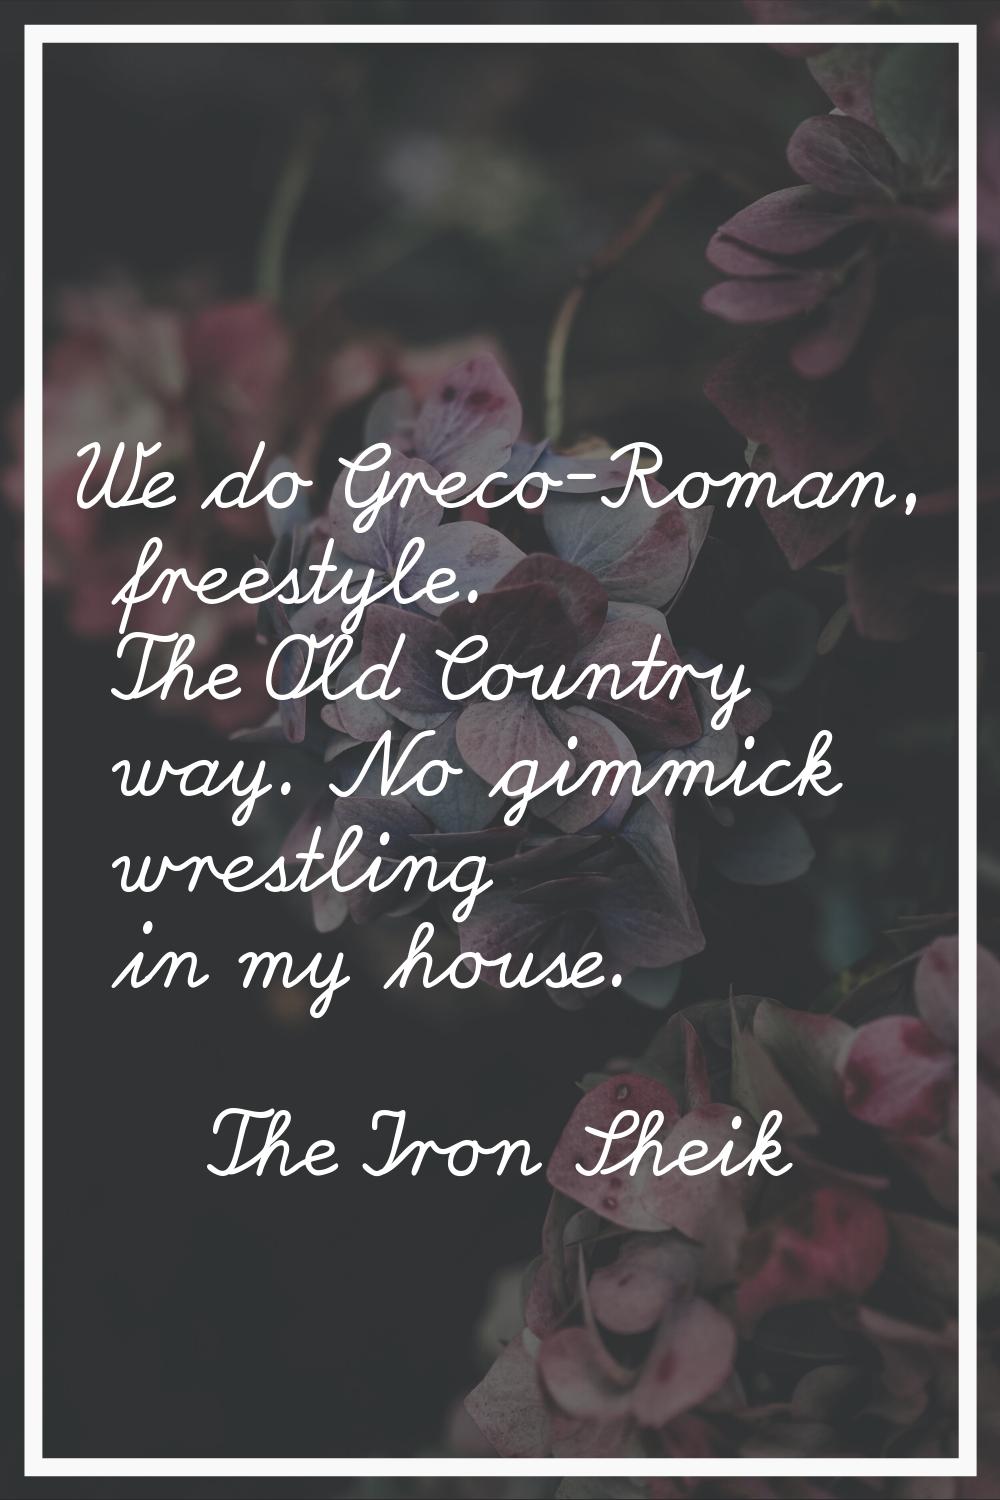 We do Greco-Roman, freestyle. The Old Country way. No gimmick wrestling in my house.